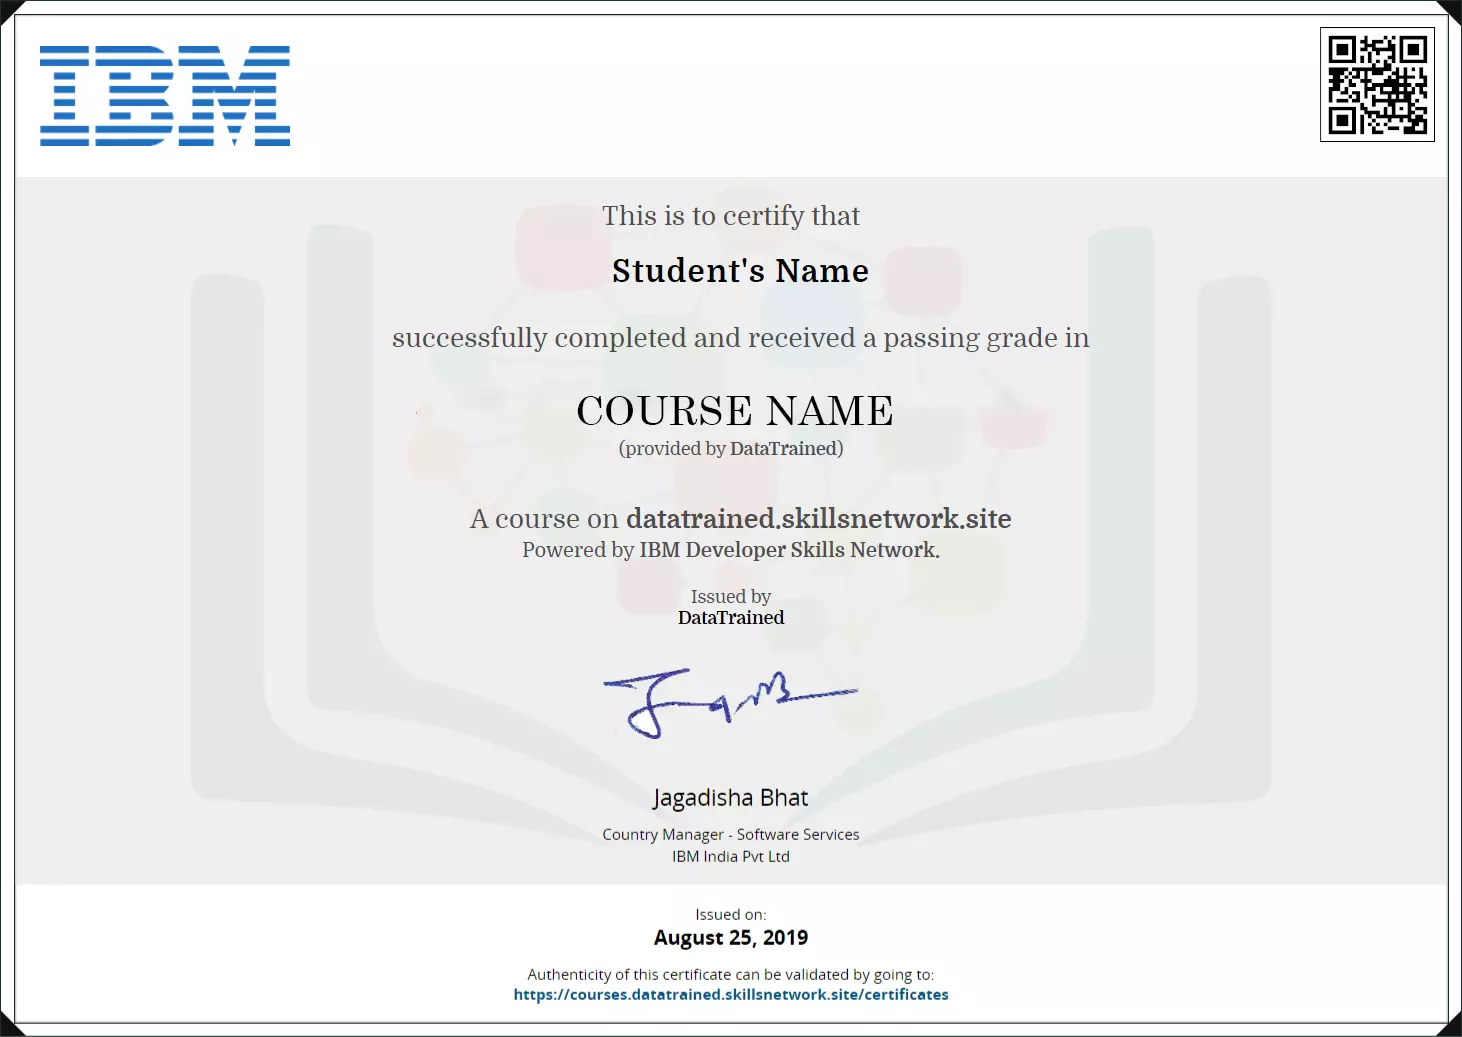 data science certification course